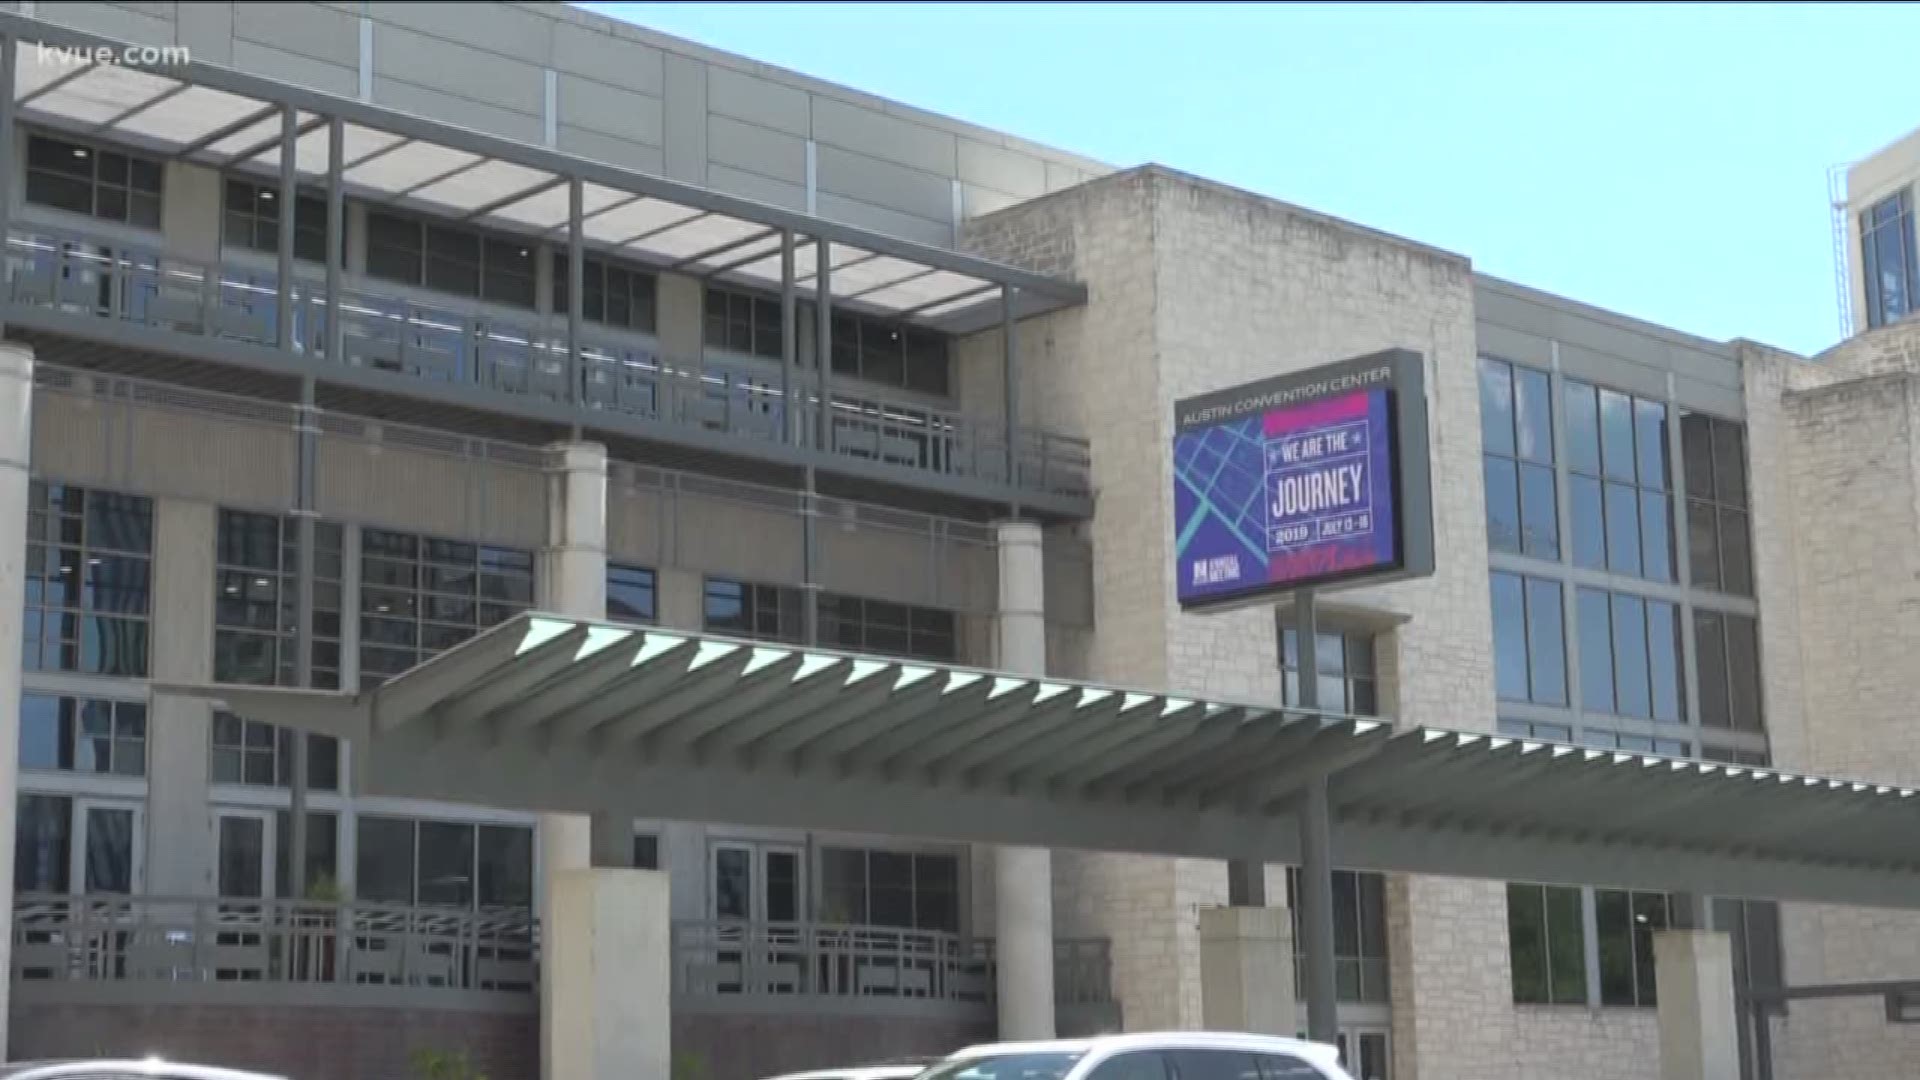 Austin's city clerk has certified a petition to have voters decide on an expansion of the convention center.